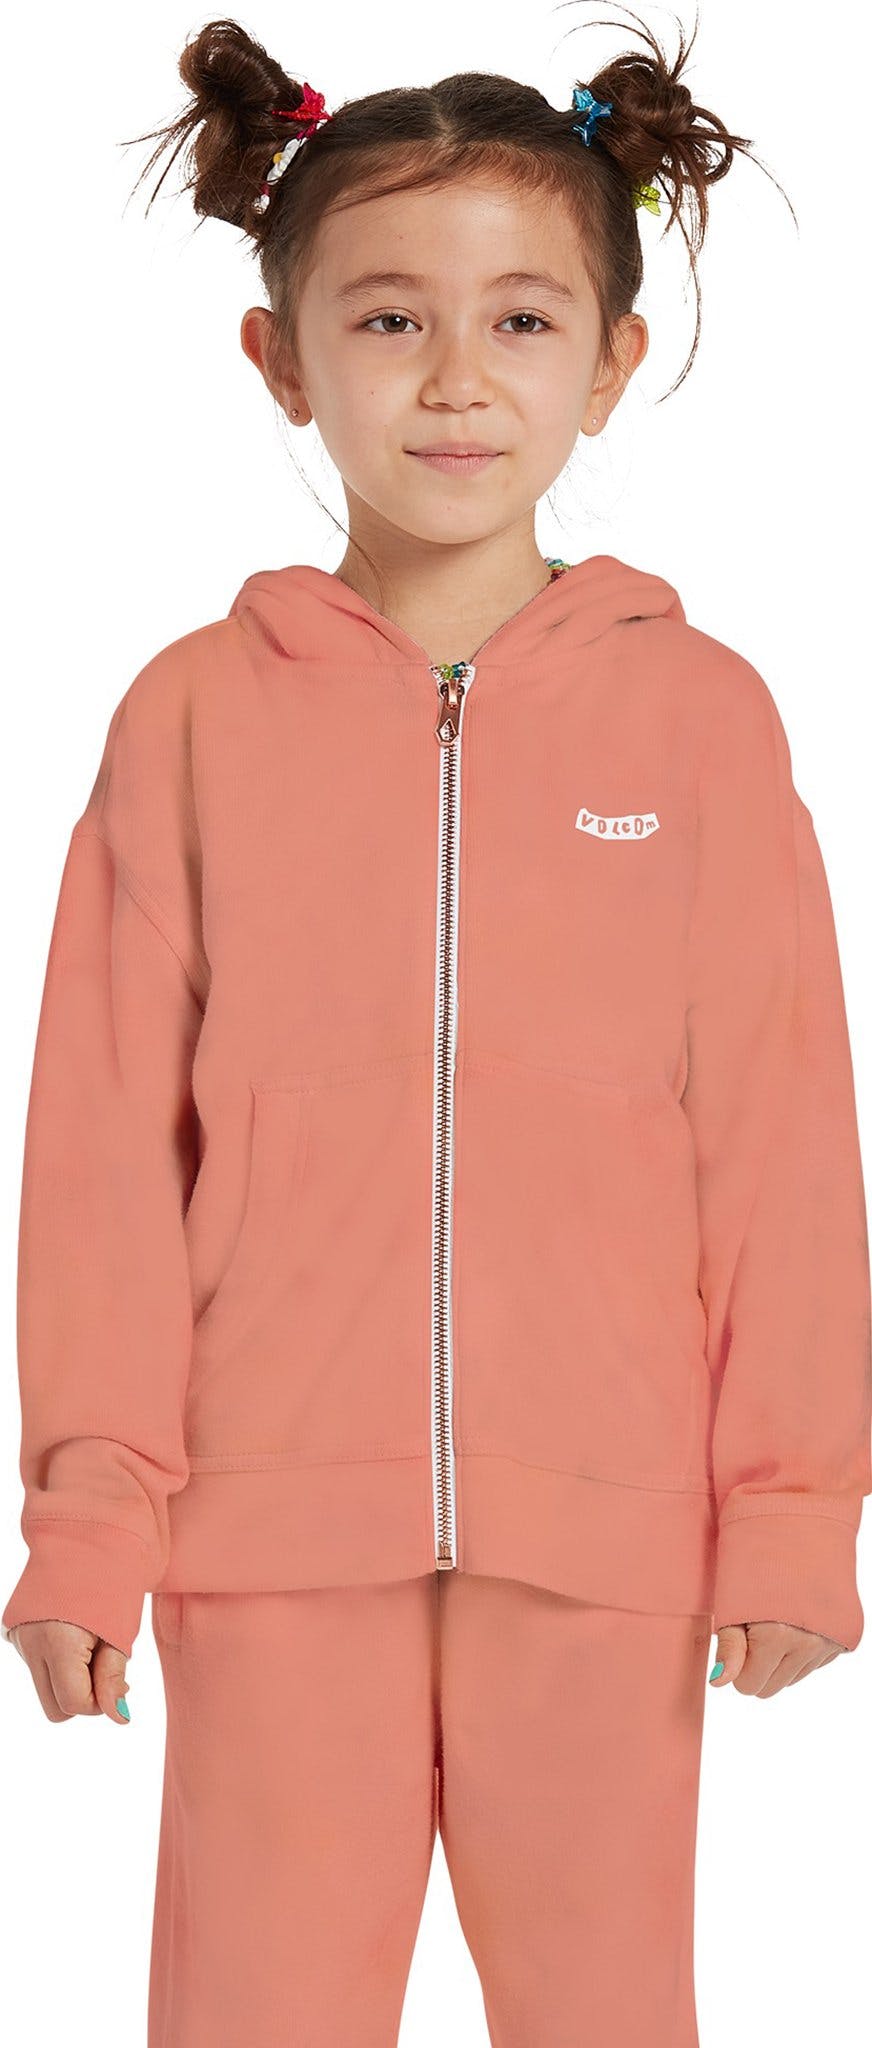 Product image for Lived In Lounge Zip Up Hoodie - Girl's